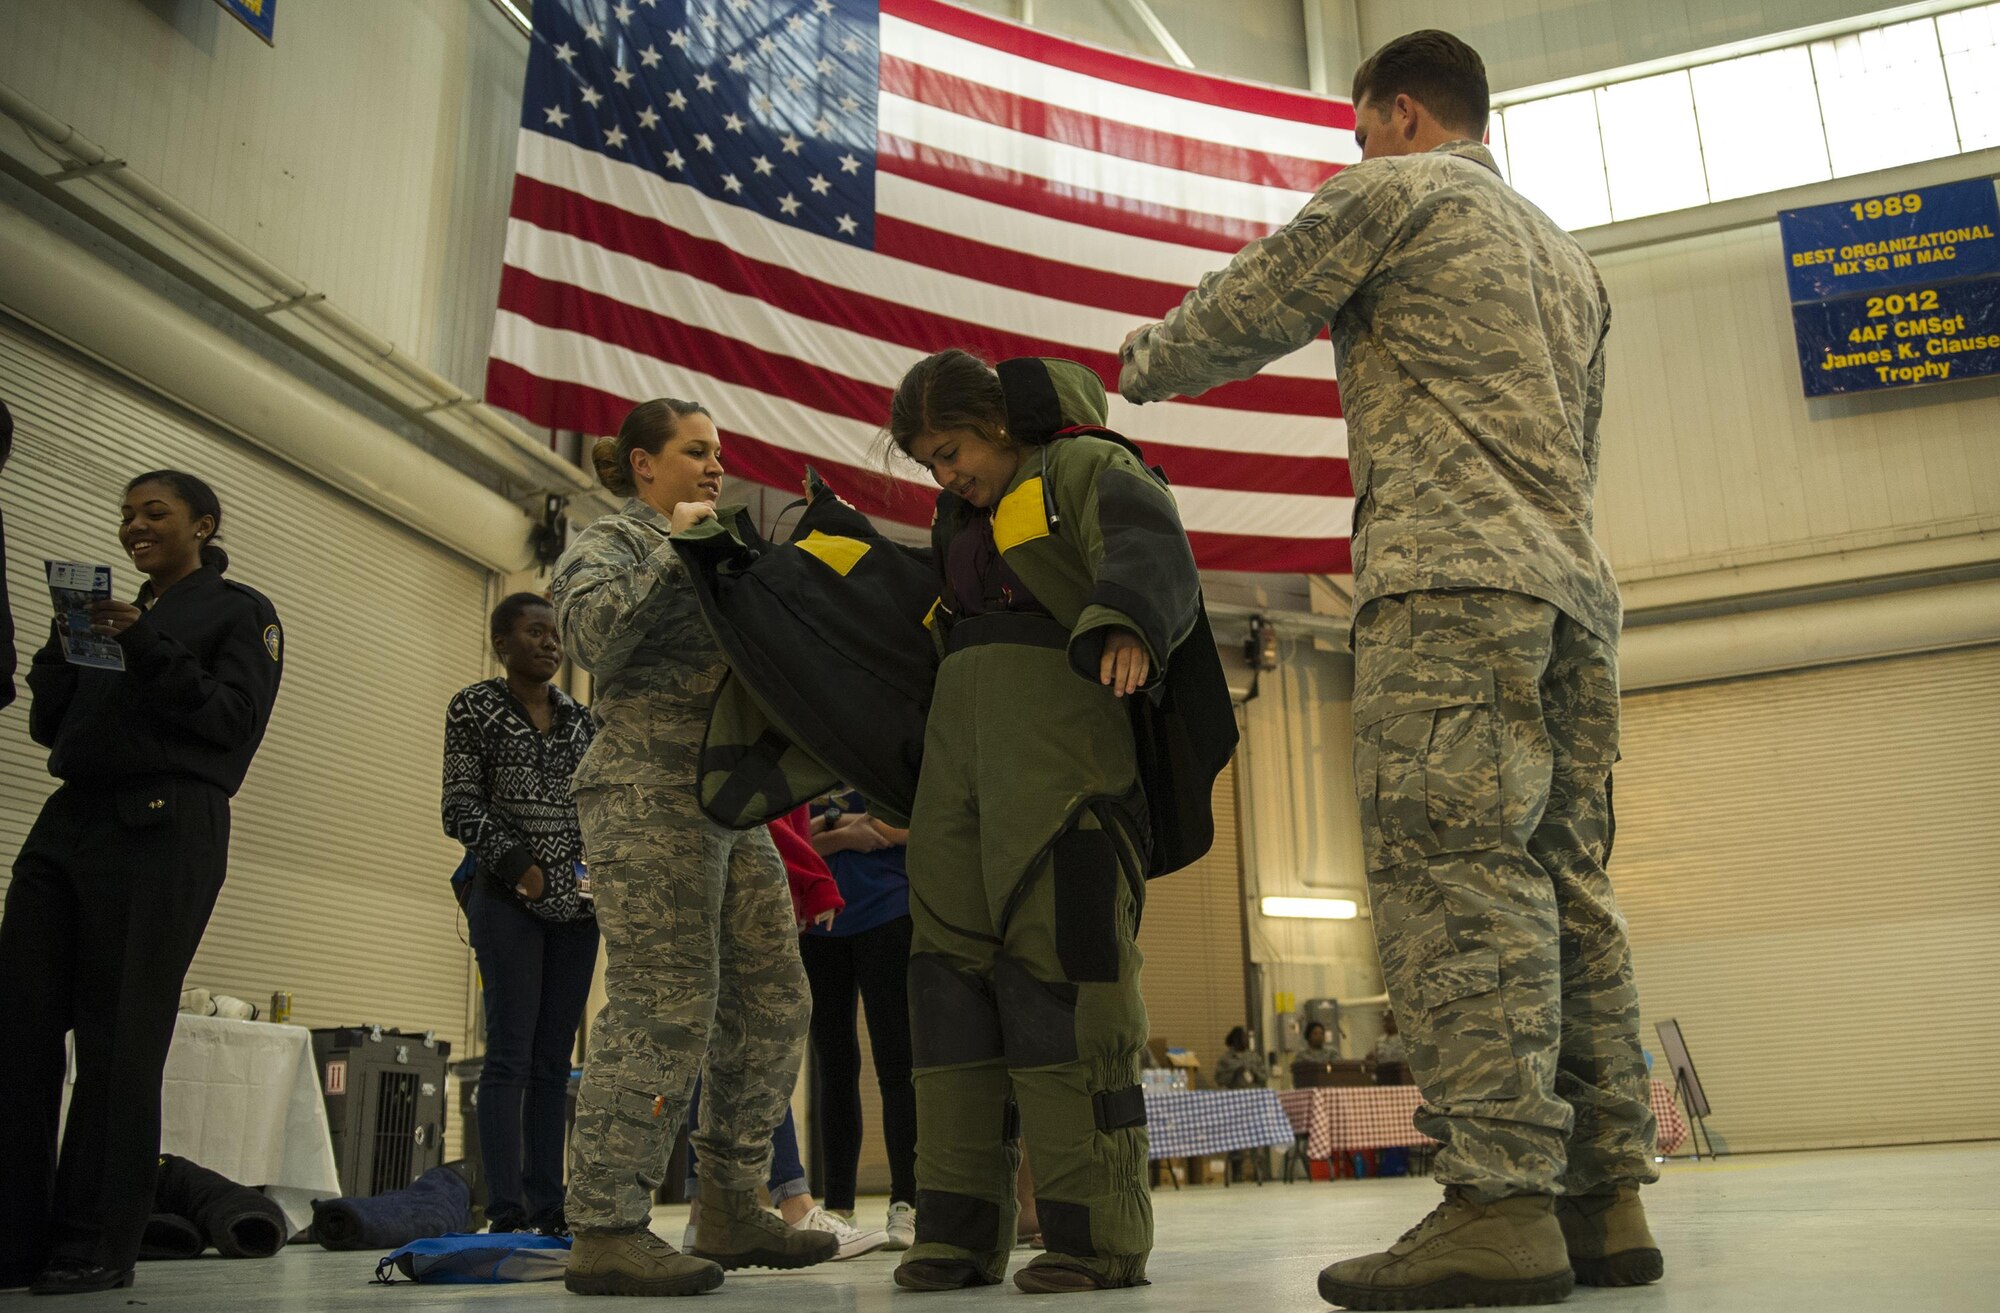 628th Explosive Ordinance technicians help a local school girl don a bomb suit at the Women in Aviation Career Day. Over 130 middle and high school girls from 12 Lowcountry schools visited Joint Base Charleston March 22 to learn about jobs in aviation as part of the 315th Airlift Wing’s 9th annual Women in Aviation Career Day. (U.S. Air Force photo by Senior Airman Jonathan Lane)